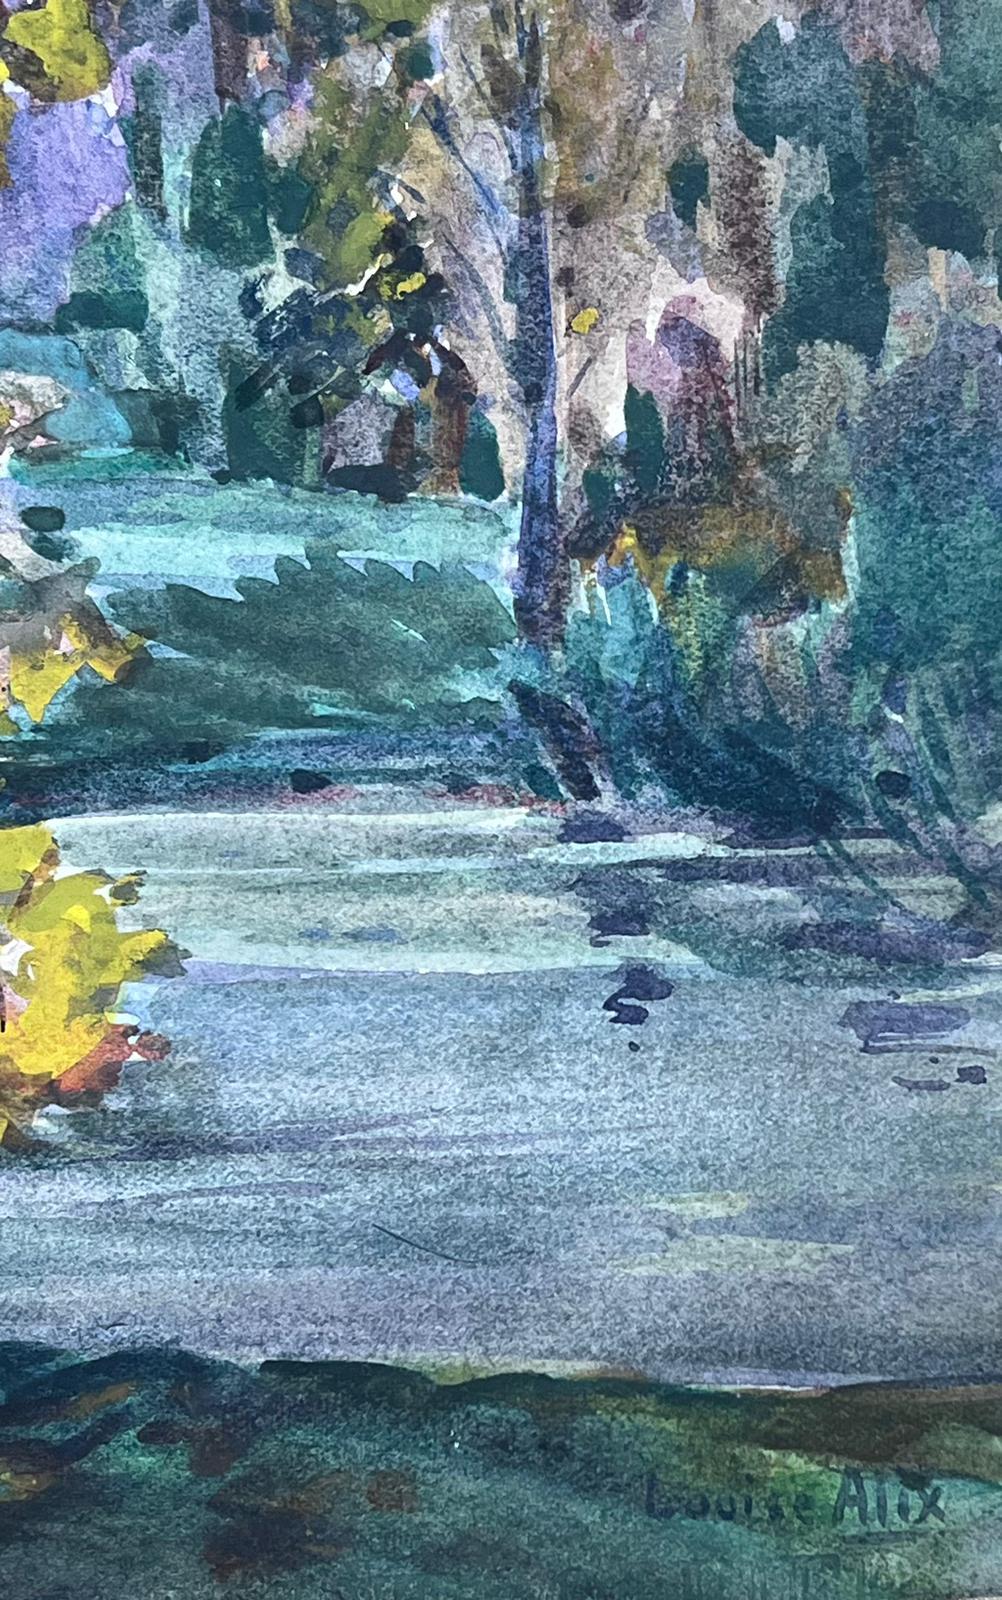 Green Flowing Stream
signed by Louise Alix (French, 1888-1980) *see notes below
provenance stamp to the back 
watercolour painting on artist paper, unframed
measures: 9.5 high by 7.5 inches wide
condition: overall very good and sound, a few scuffs